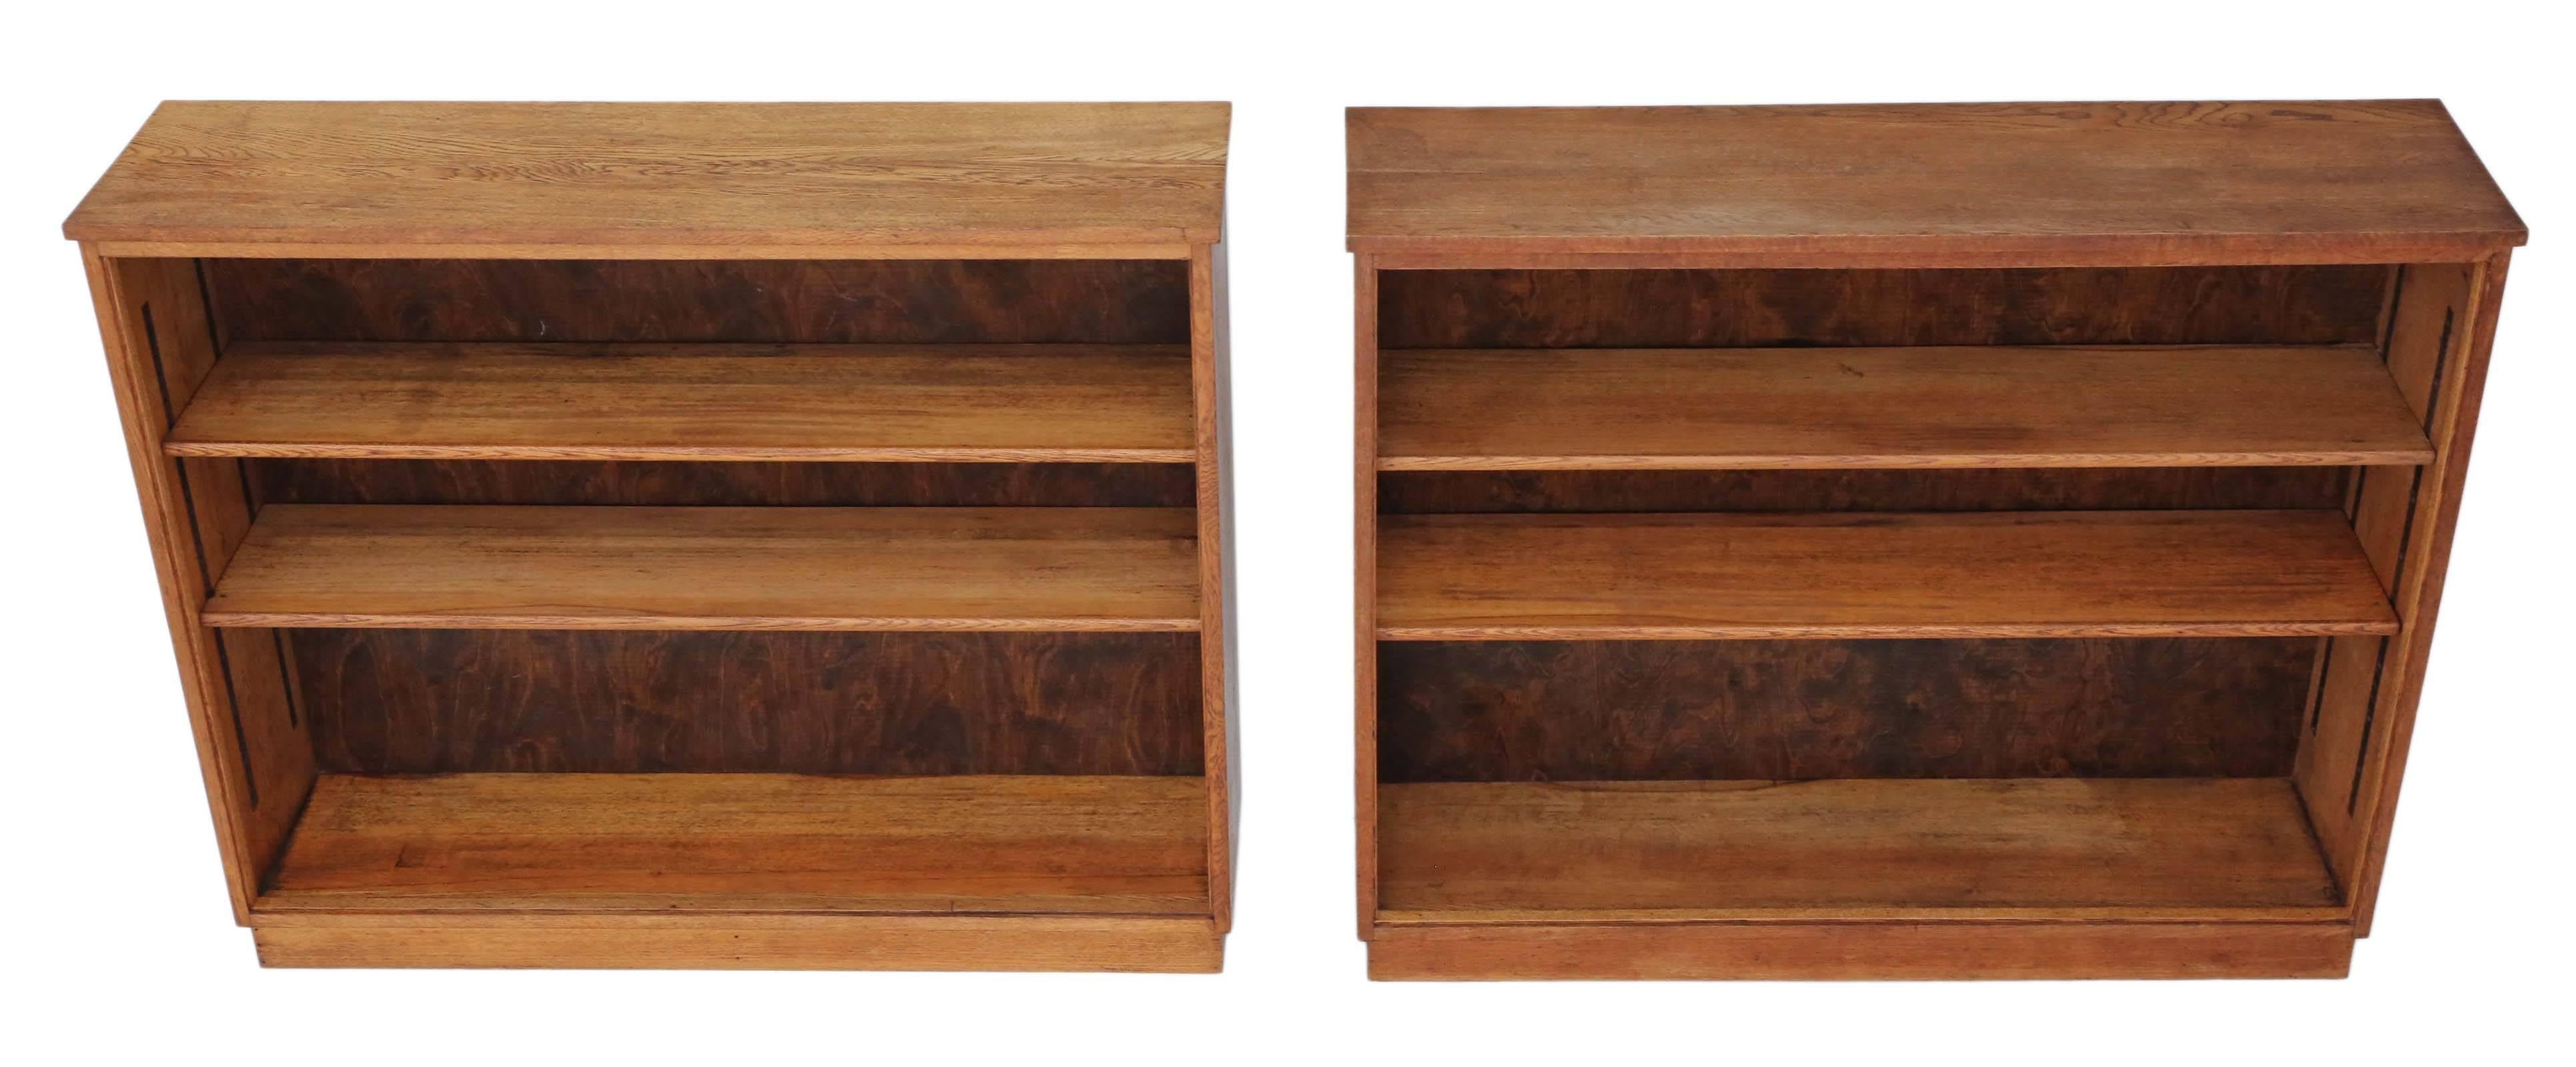 Antique pair of quality adjustable oak open bookcases, circa 1950 with plywood backs. Simple clean design.

Solid and strong, with no loose joints.

Would look great in the right location! No woodworm.

Overall maximum dimensions: 128 cm W x